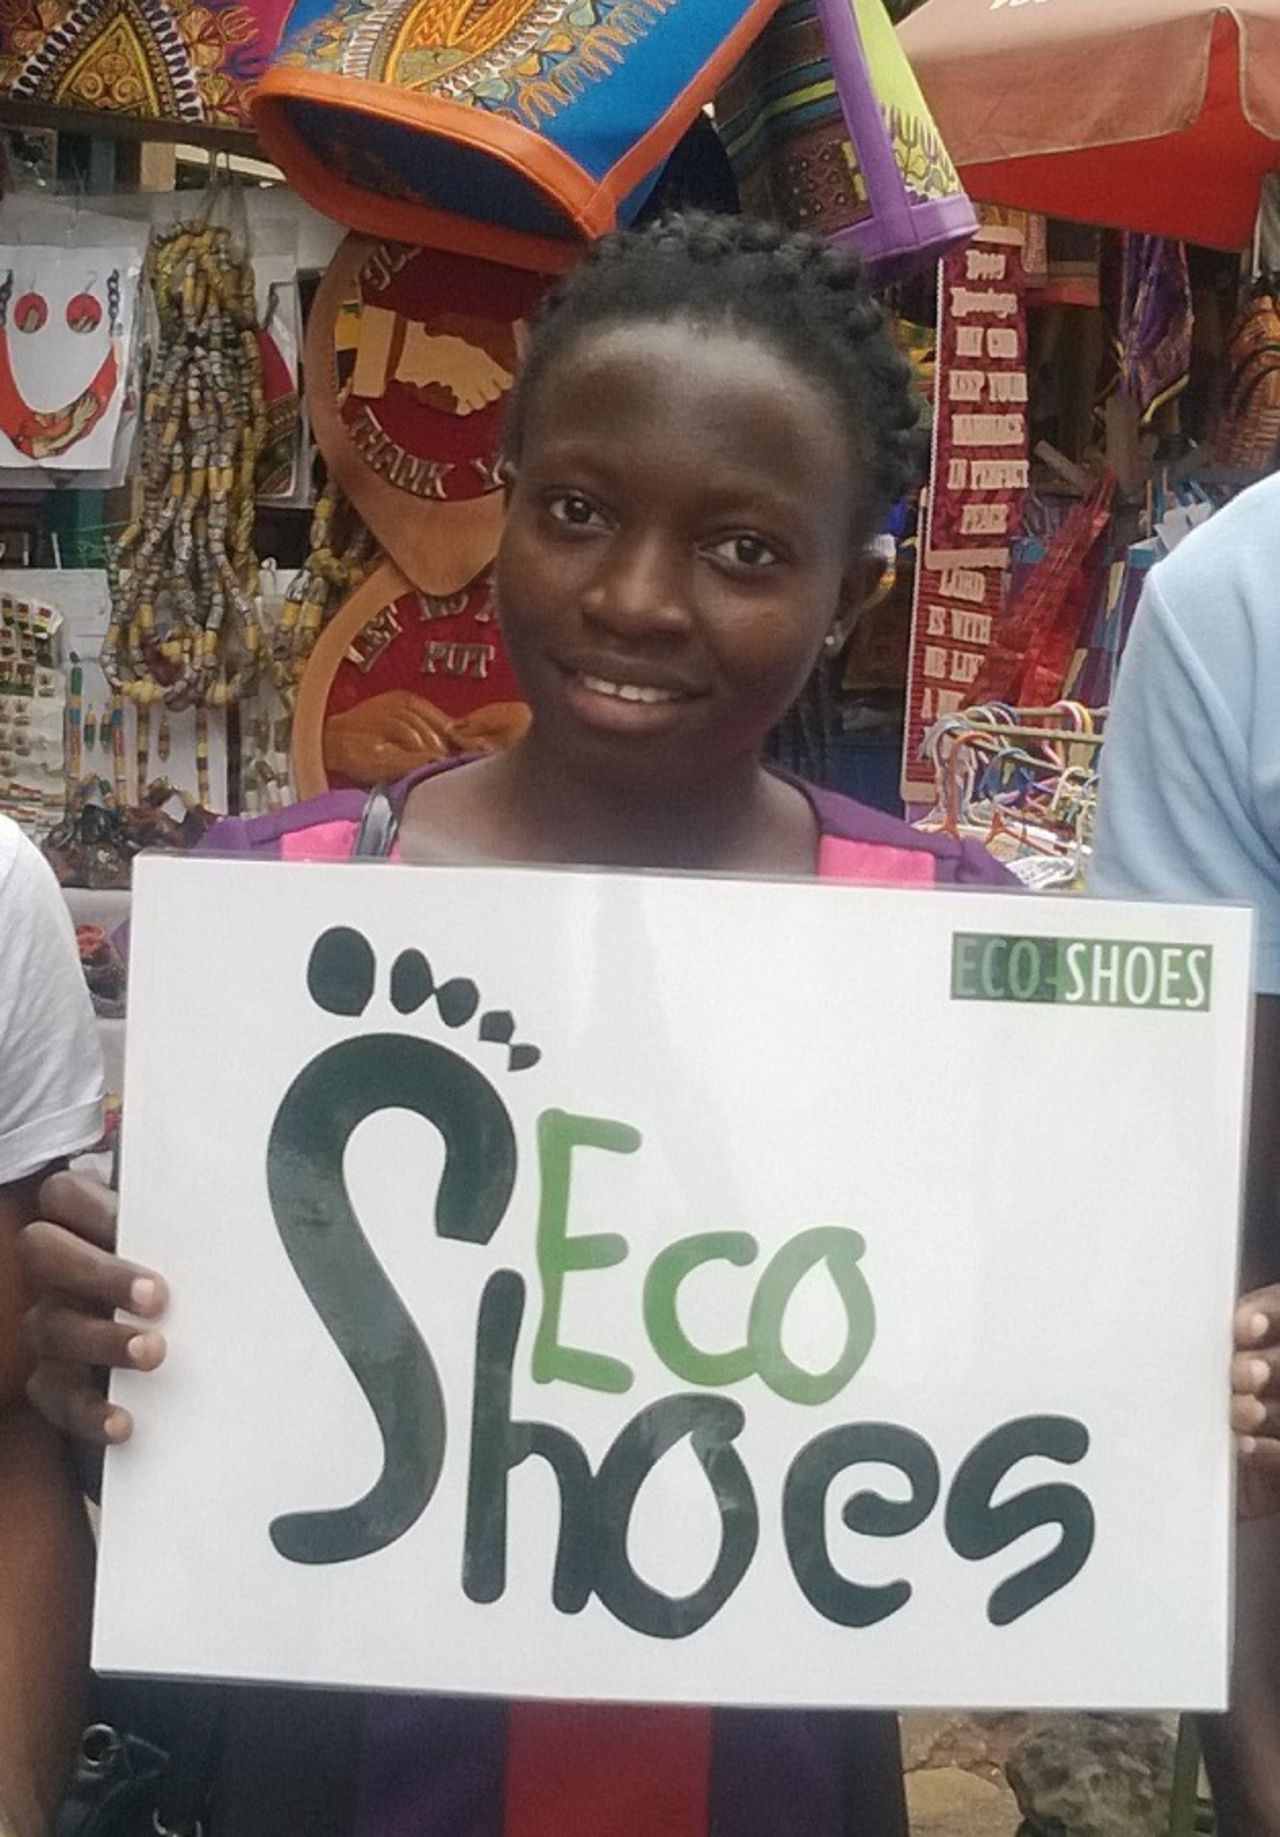 Social entrepreneur Mabel Suglo's Eco-Shoes Project employs artisans with disabilities to manufacture shoes from recycled tires and textiles, creating employment and providing a sustainable market for waste products.